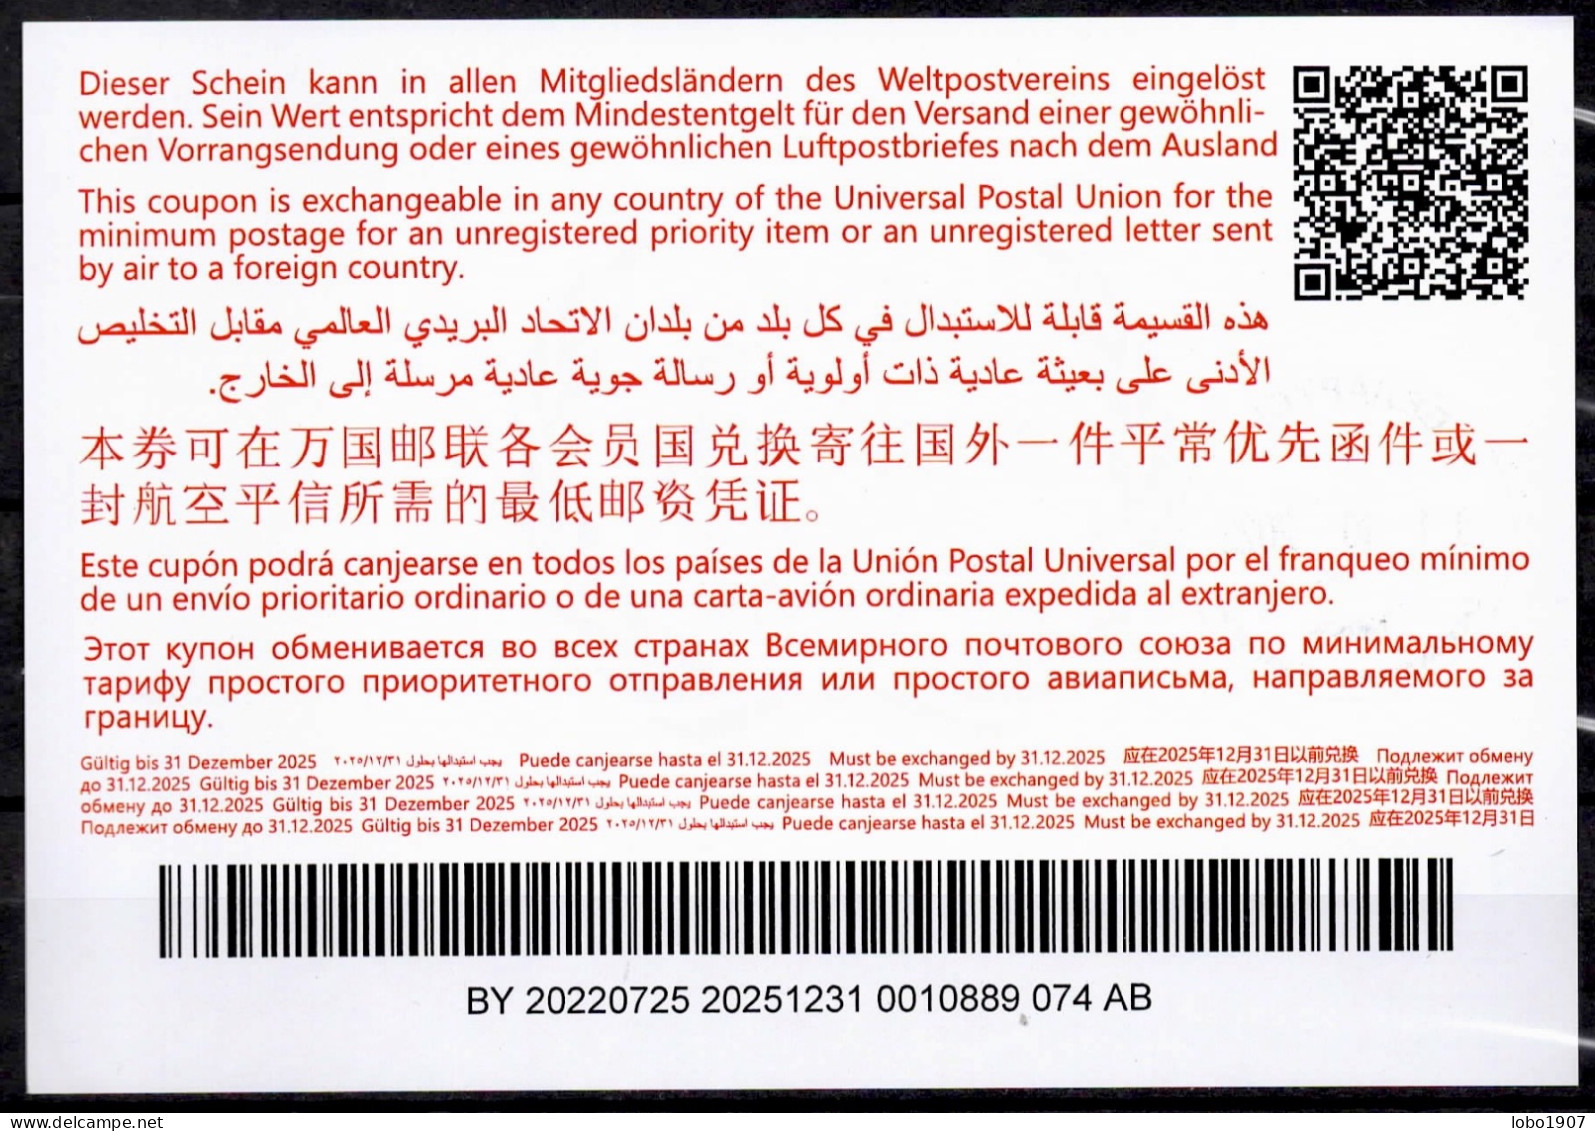 BELARUS  Abidjan Special Issue Ab49  20220725 AB  Int. Reply Coupon Reponse Antwortschein IRC IAS  MINSK 01.10.2022  FD! - Belarus